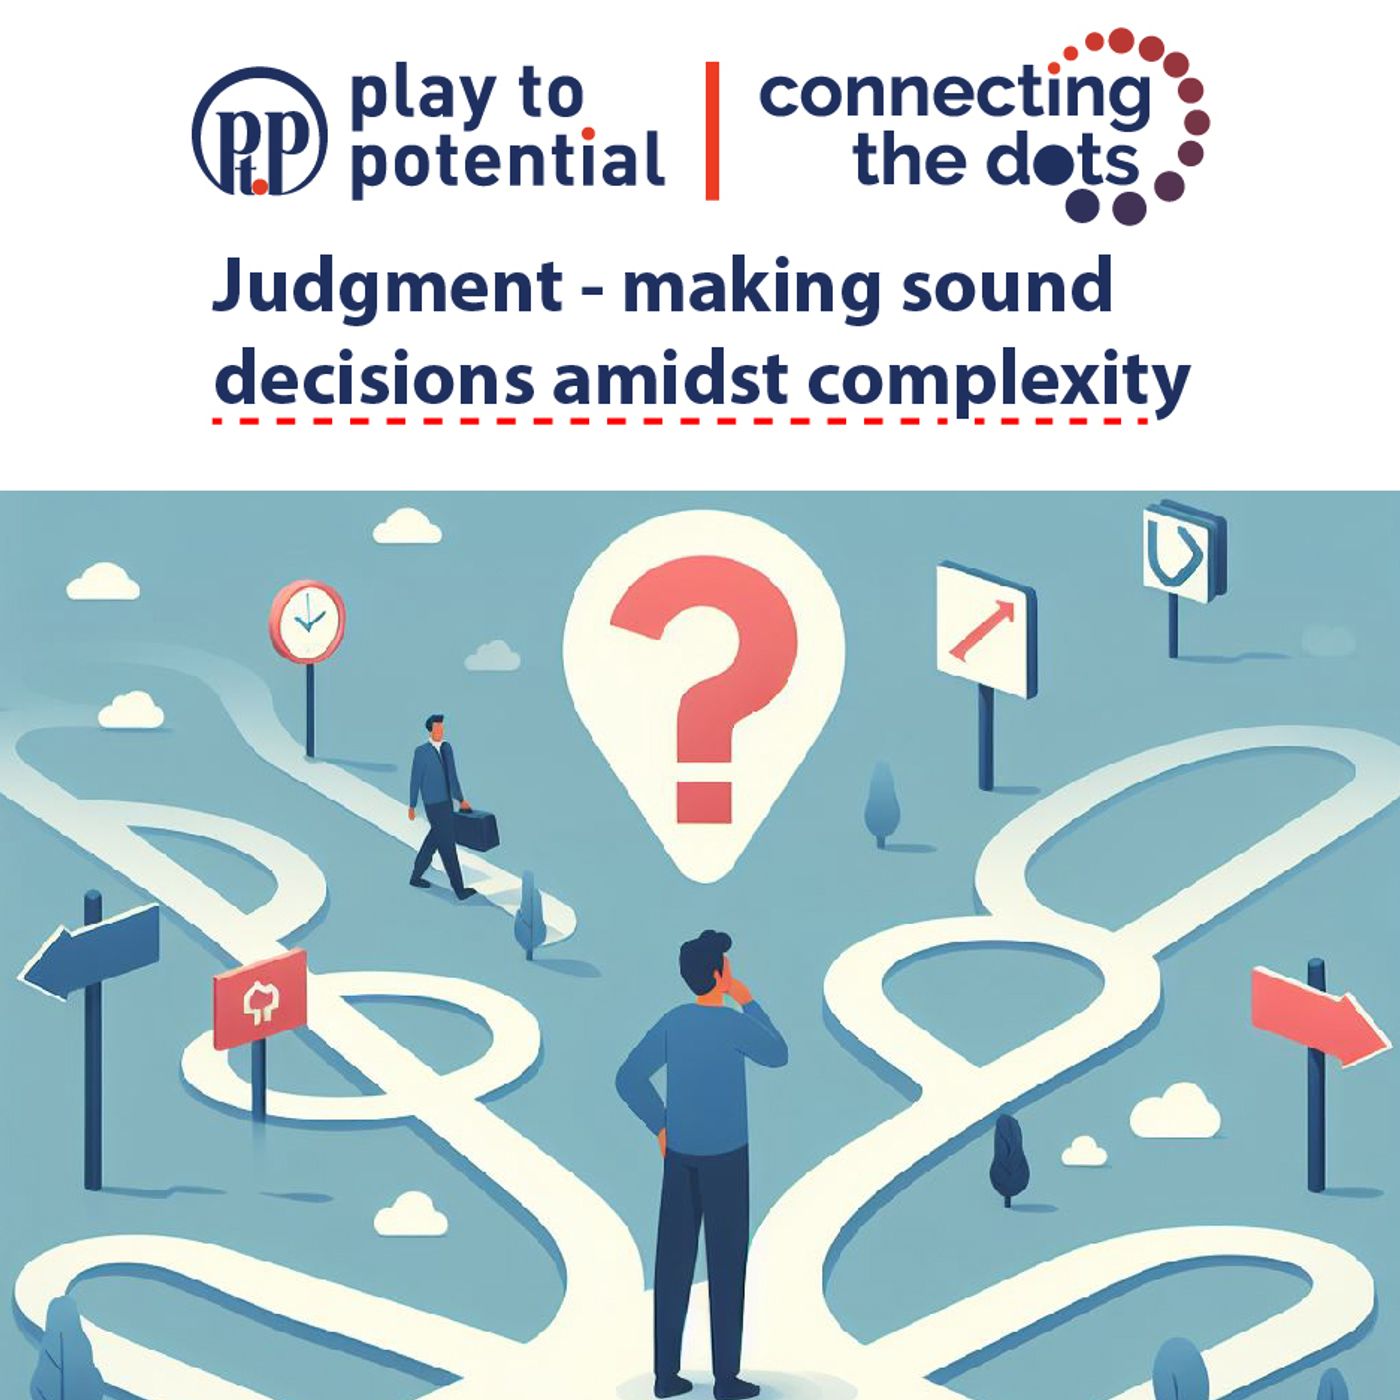 684: EP8 Connecting the Dots: Judgment - Making sound decisions amidst complexity